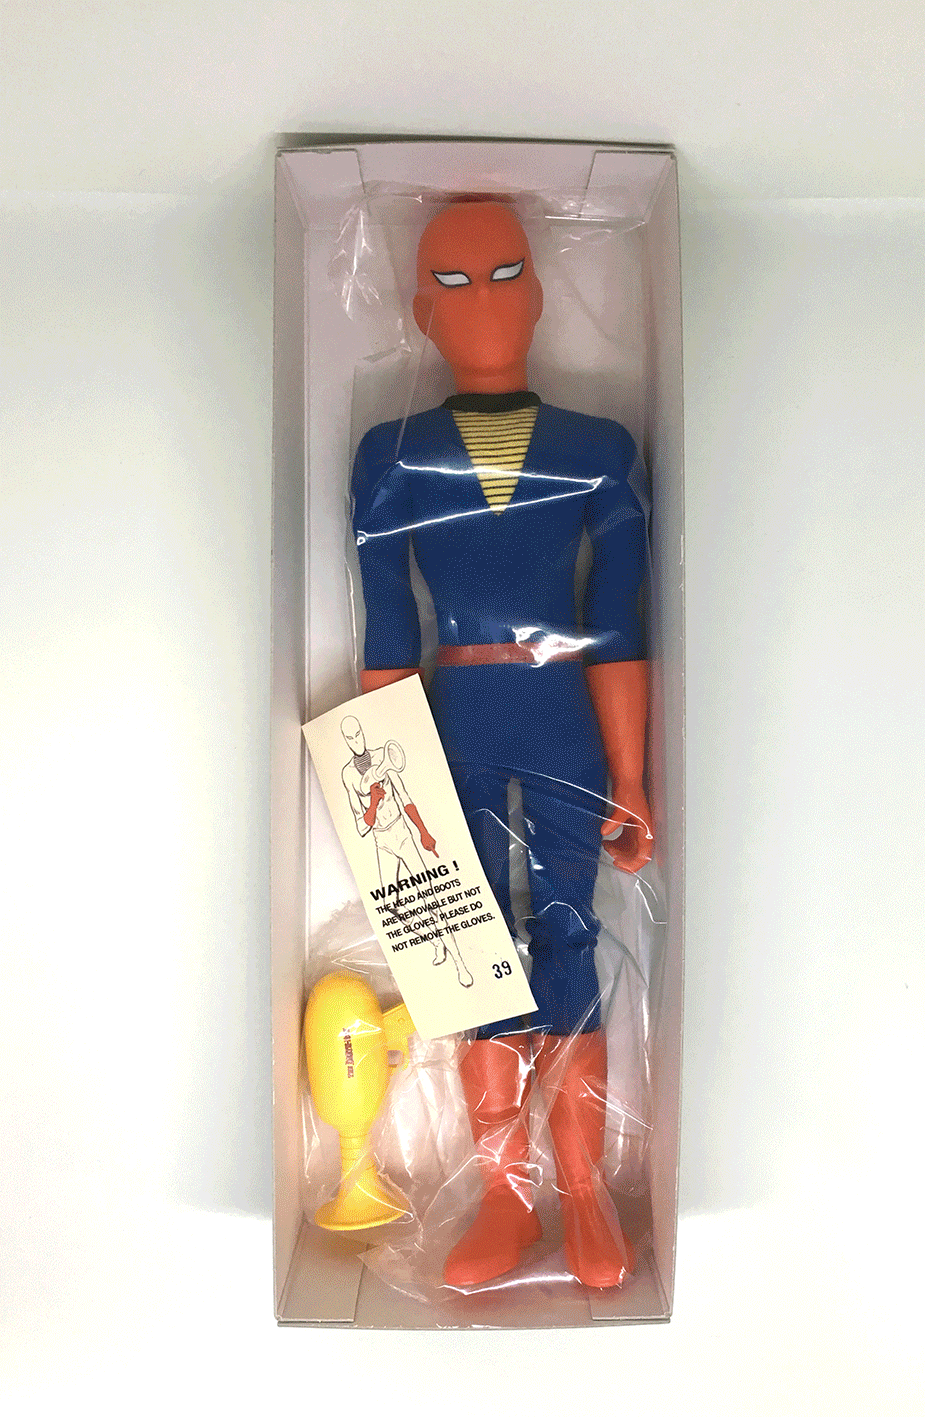 DANIEL CLOWES “THE DEATH-RAY 12inch Action Figure"